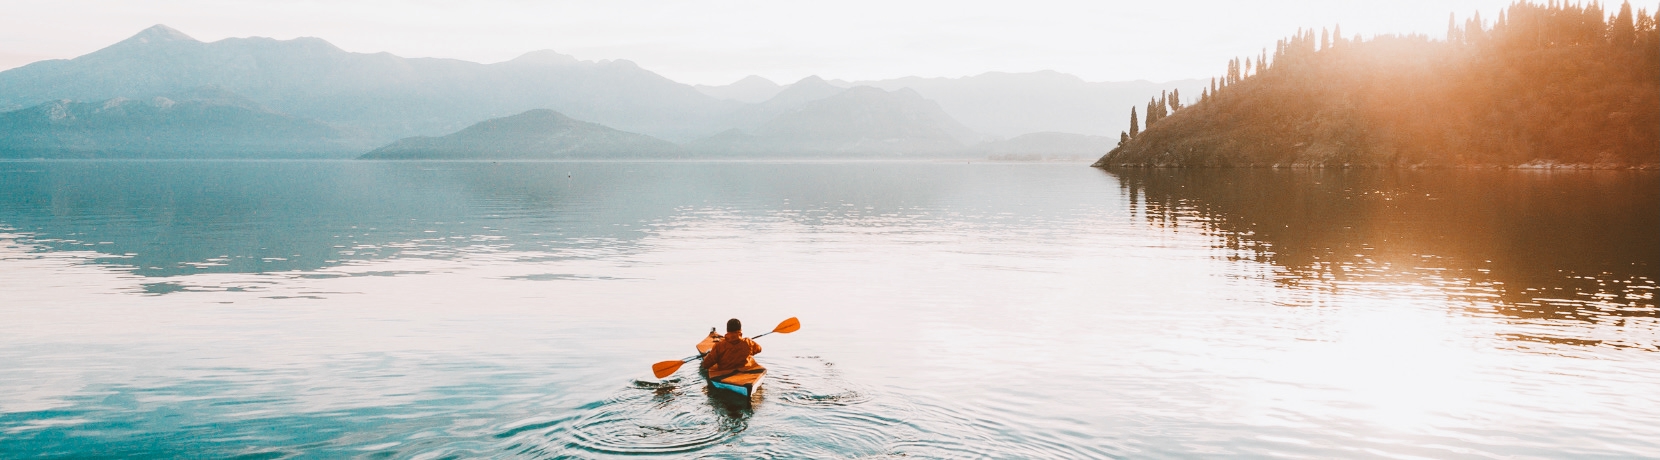 A landscape picture of a lake with someone in a kayak.